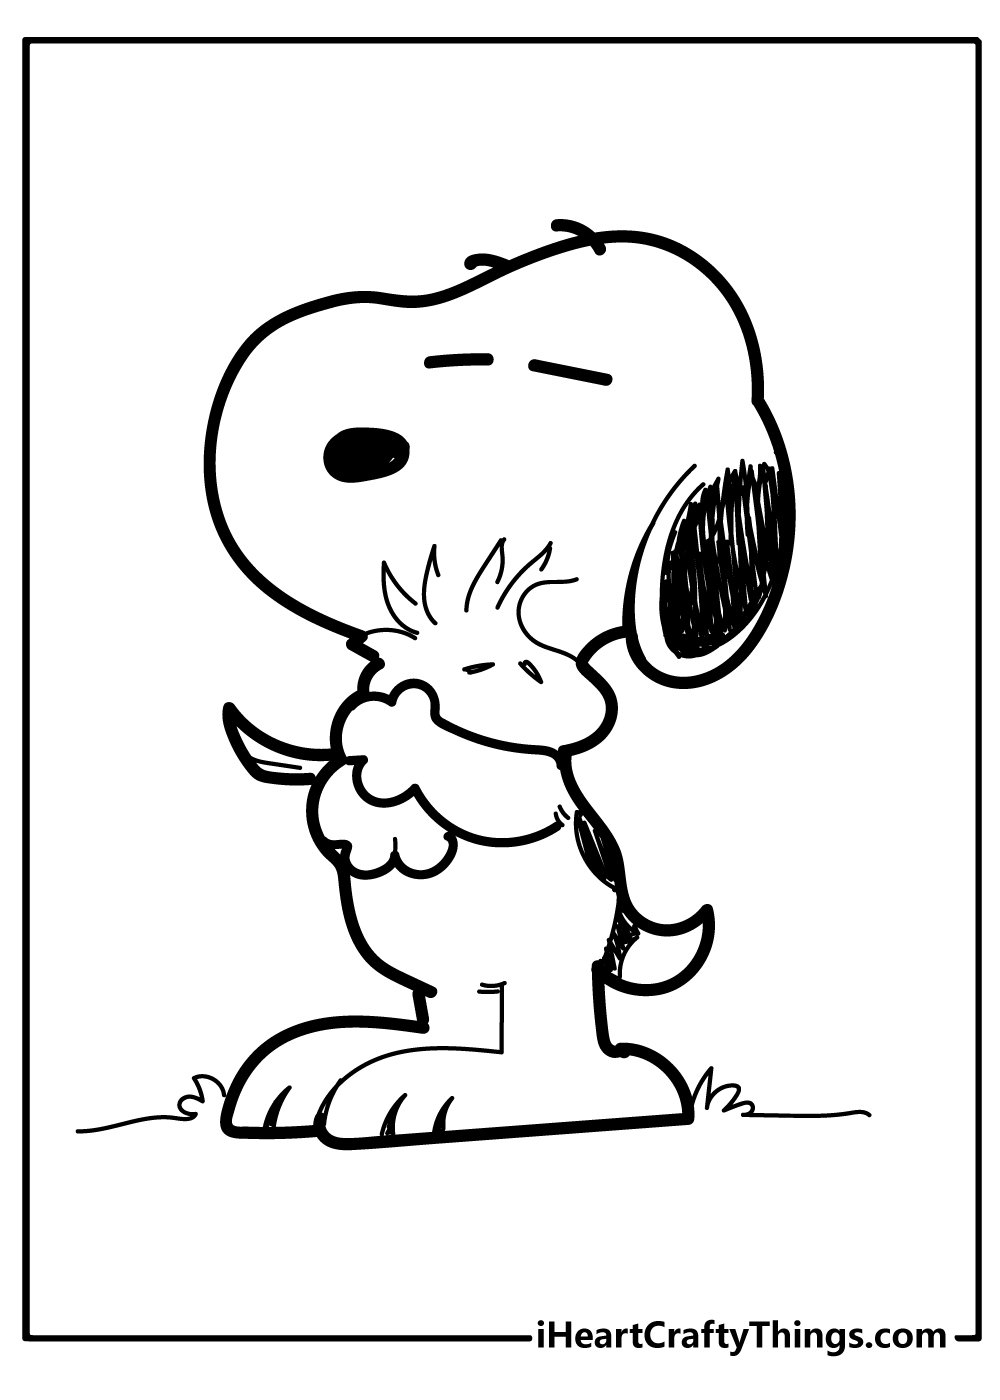 Snoopy Coloring Book for adults free download